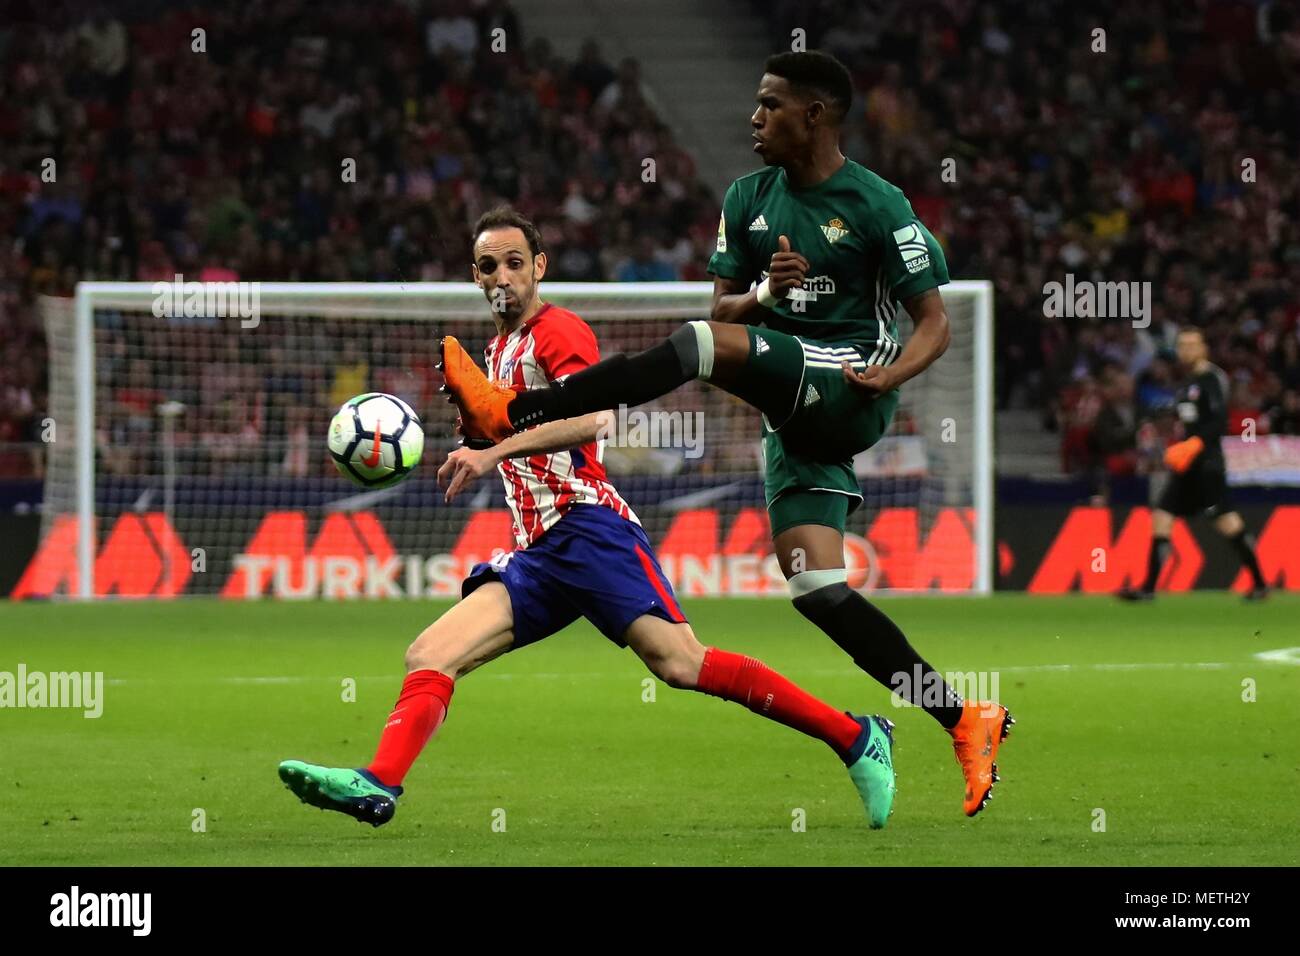 Madrid, Spain. 22nd Apr, 2018. Real Beits' Junior Firpo (R) vies with Atletico Madrid's Juanfran during the Spanish league La Liga soccer match between Atletico Madrid and Real Betis in Madrid, Spain, on April 22, 2018. The match ended 0-0. Credit: Edward Peters Lopez/Xinhua/Alamy Live News Stock Photo